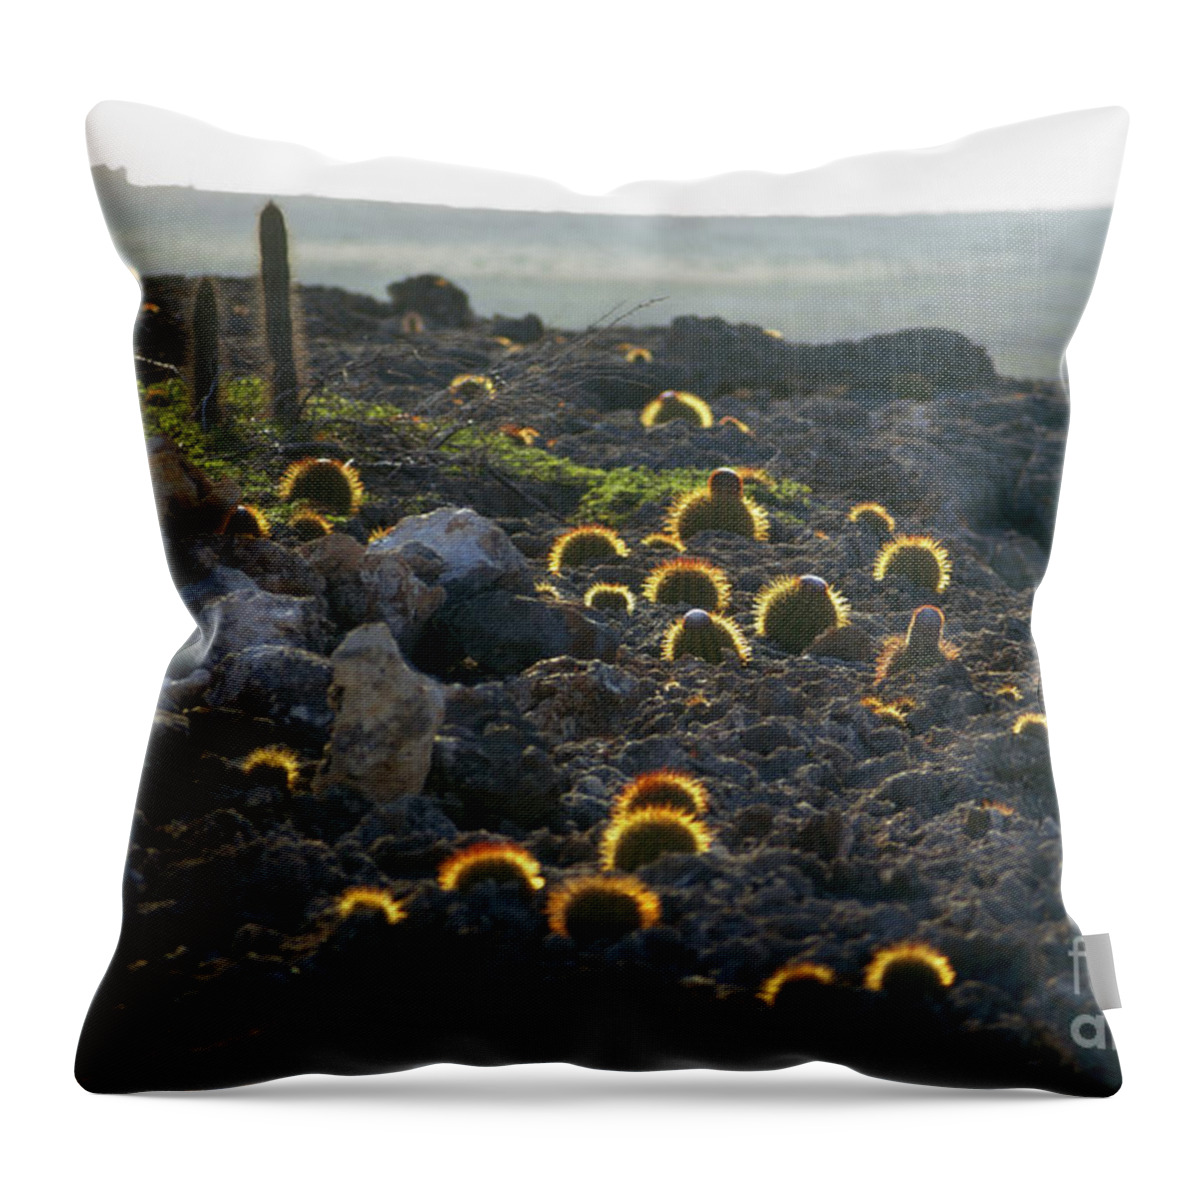 1973 Throw Pillow featuring the photograph Botany: Cacti by Granger